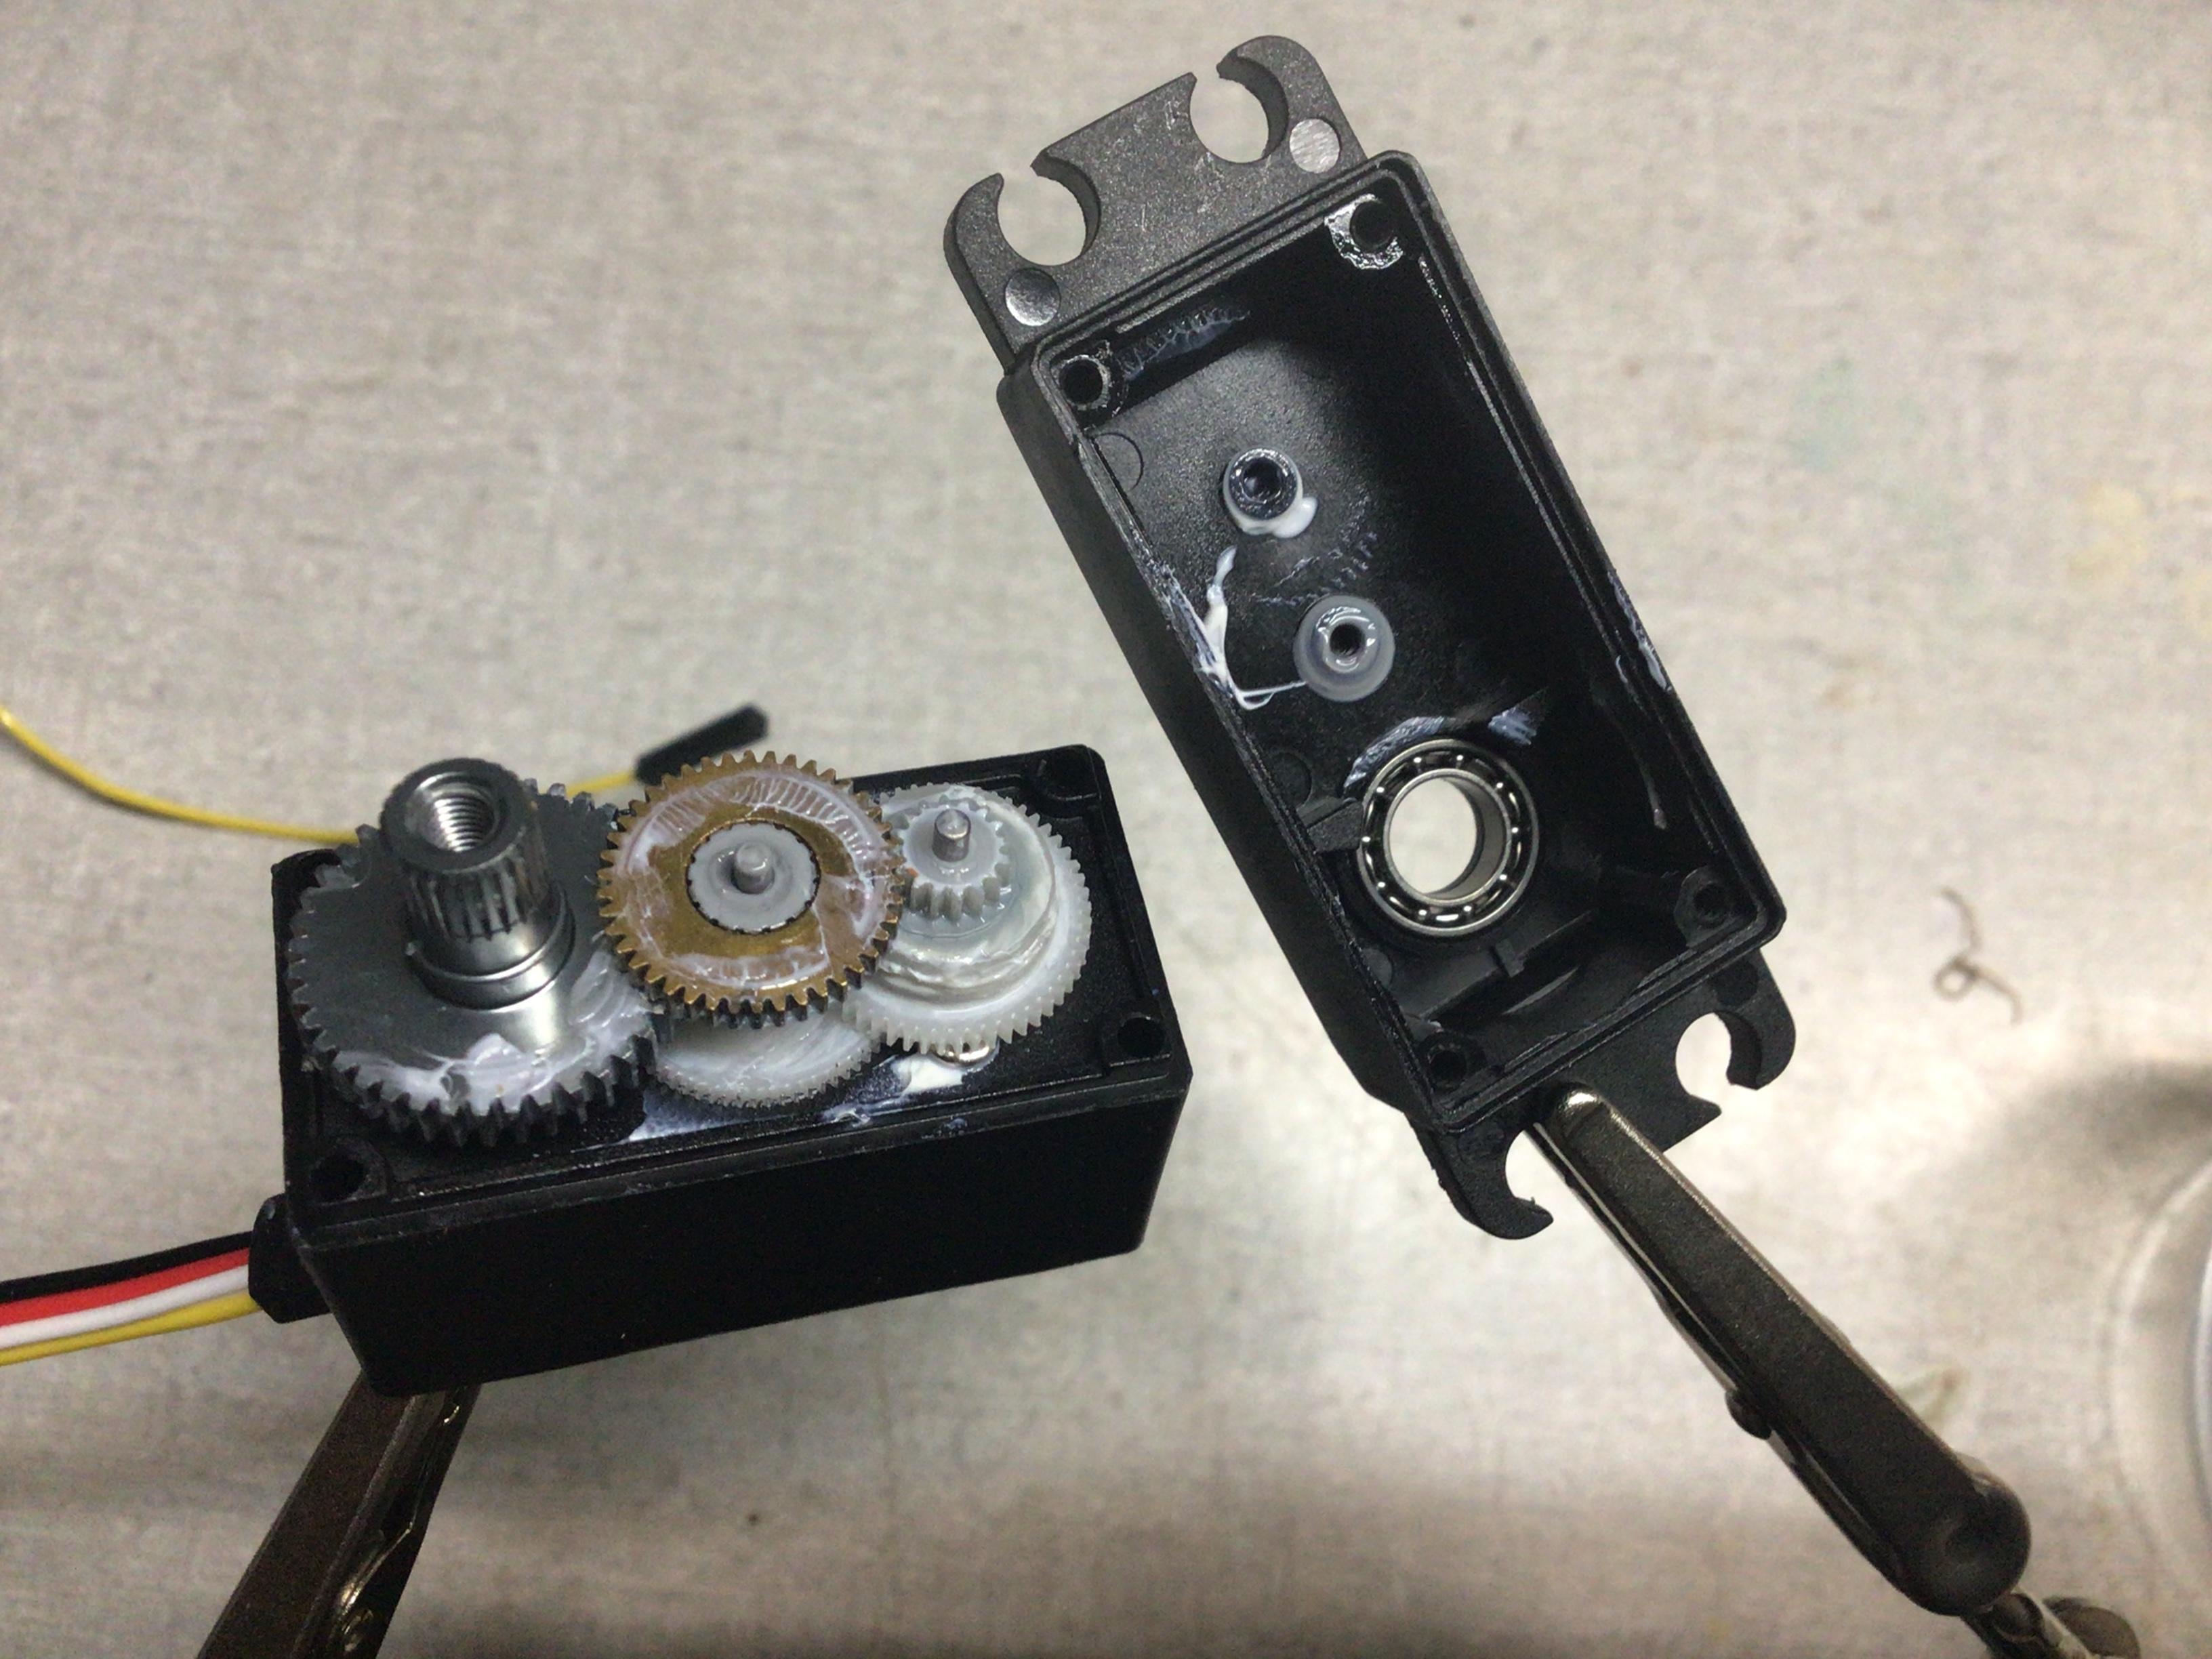 Feedback 360 motor with top removed to the side showing internal gearing and grease